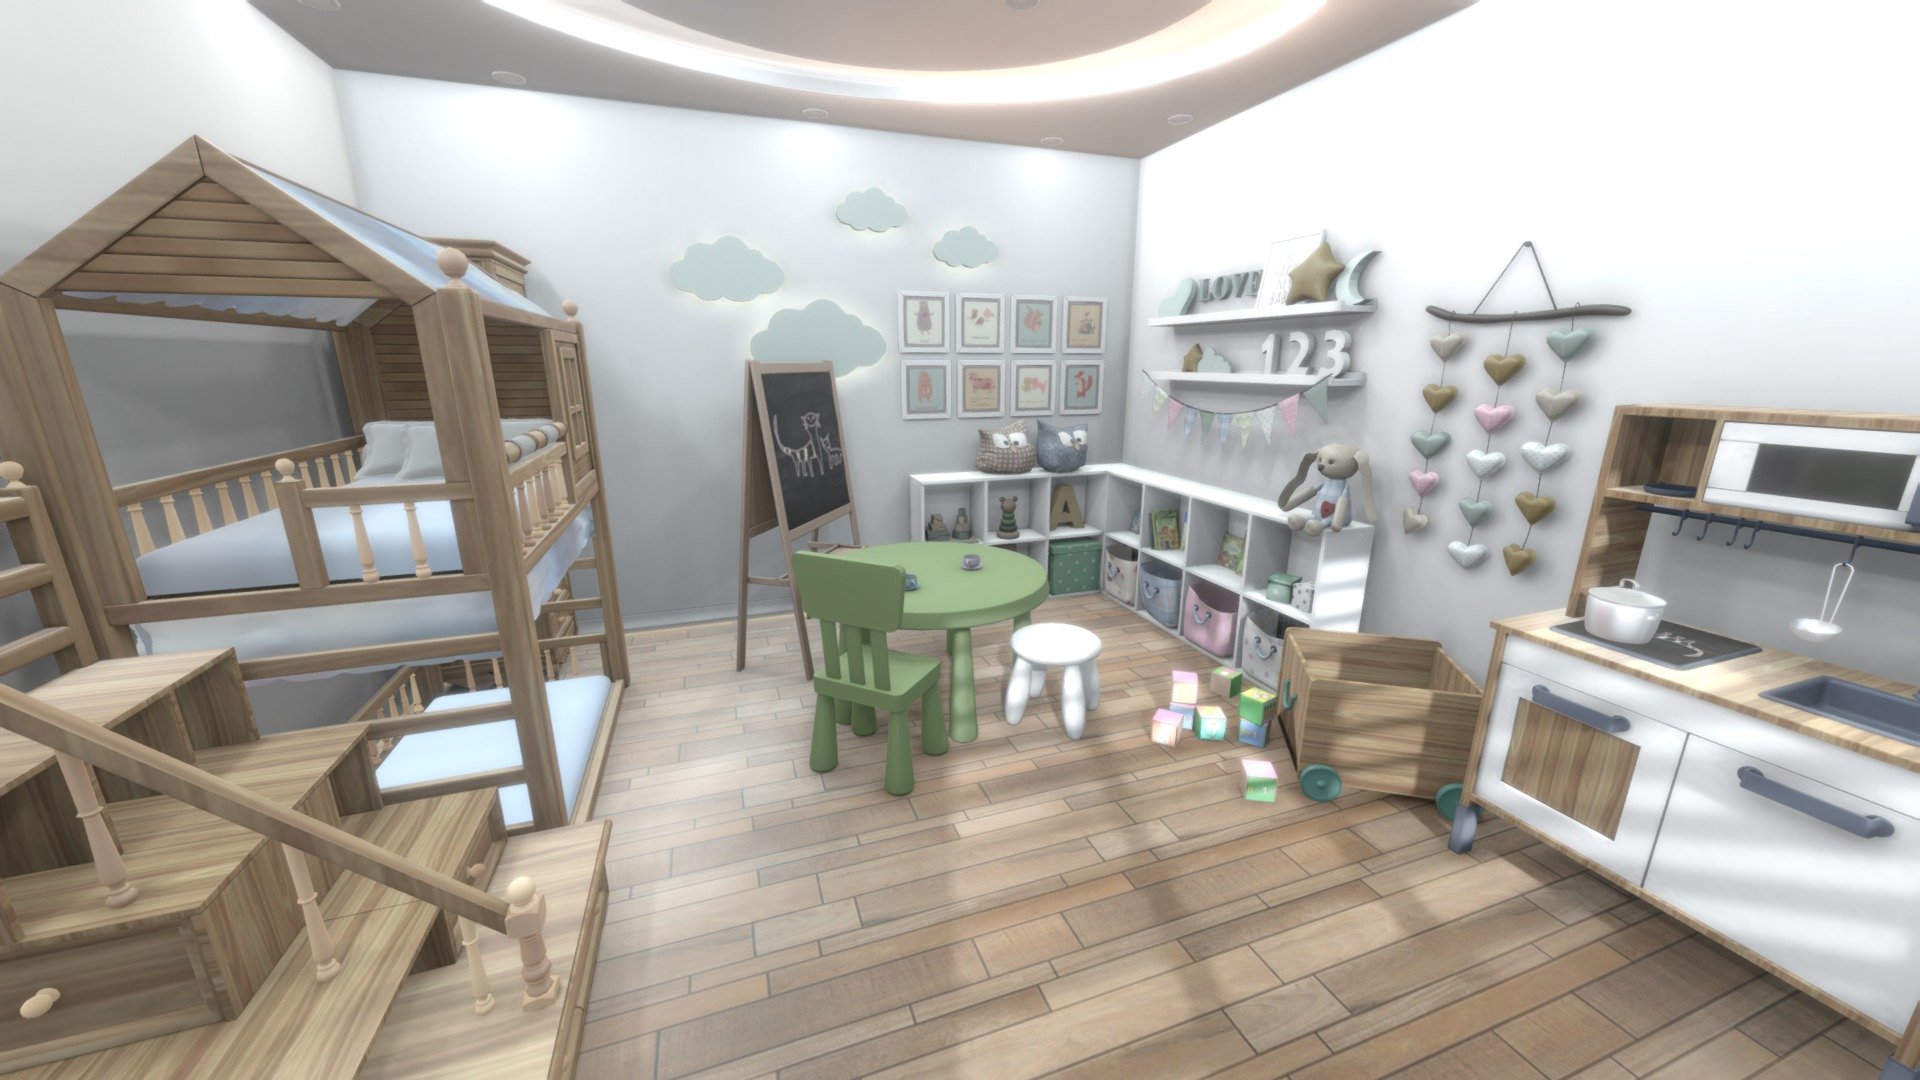 Highly detailed 3d model of modern Child's Bedroom set with all textures, shaders and materials. It is ready to use, just put it into your scene.
Format FBX file size : 4.67MB

Click on the link to see more models : https://sketchfab.com/GbehnamG/store

If you need customized 3d models , feel free to contact at: mr.gbehnamg@yahoo.com - Child's Bedroom - Buy Royalty Free 3D model by BehNaM (@GbehnamG) 3d model